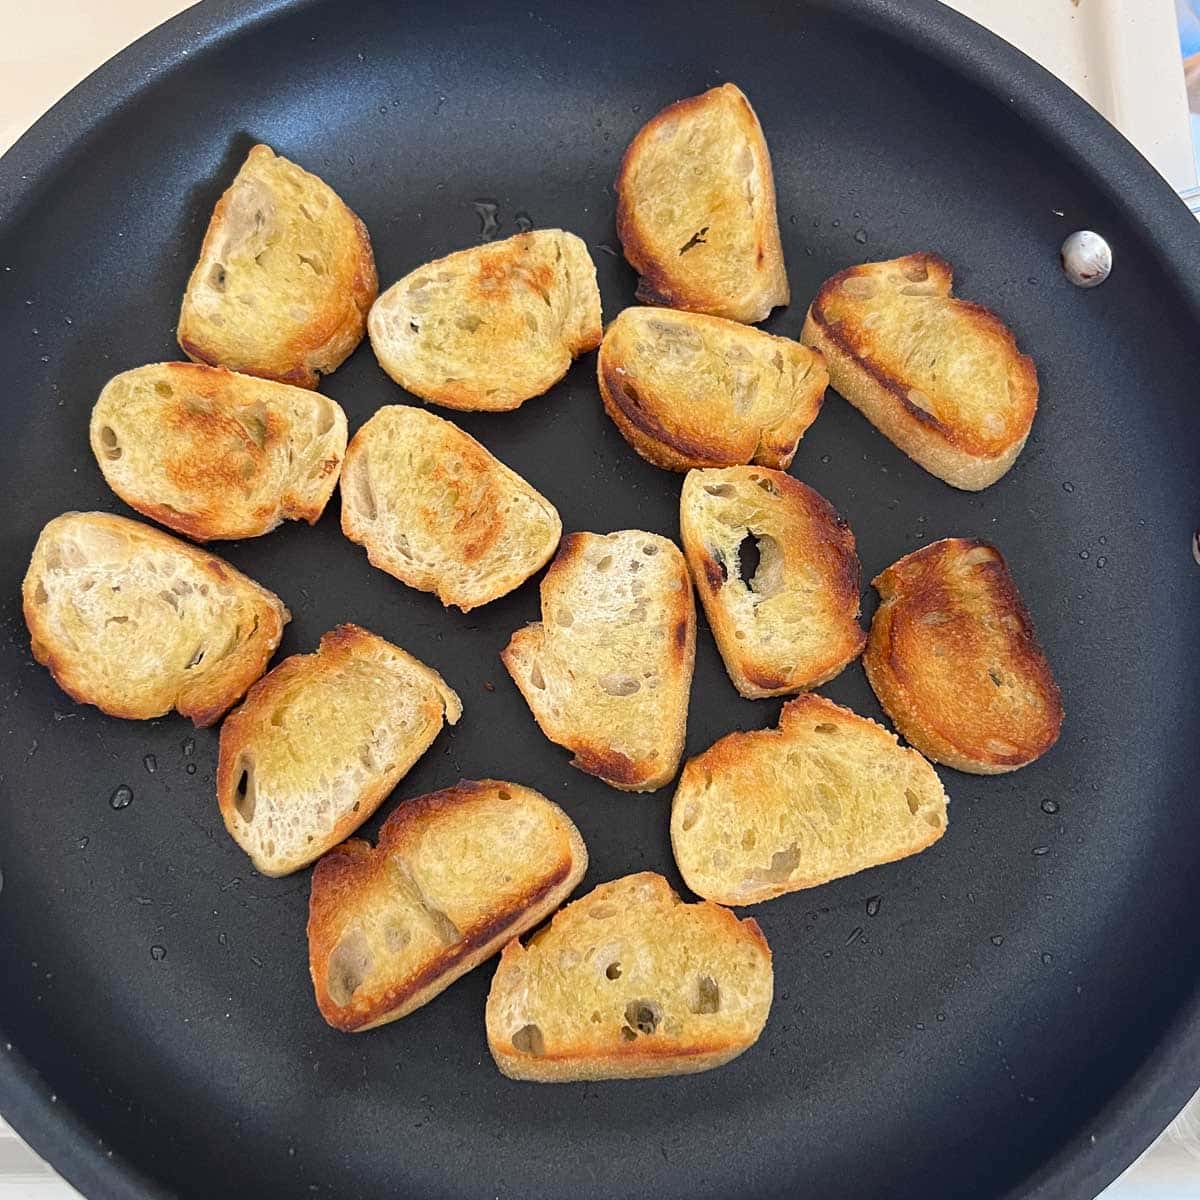 baguette slices after toasting in pan